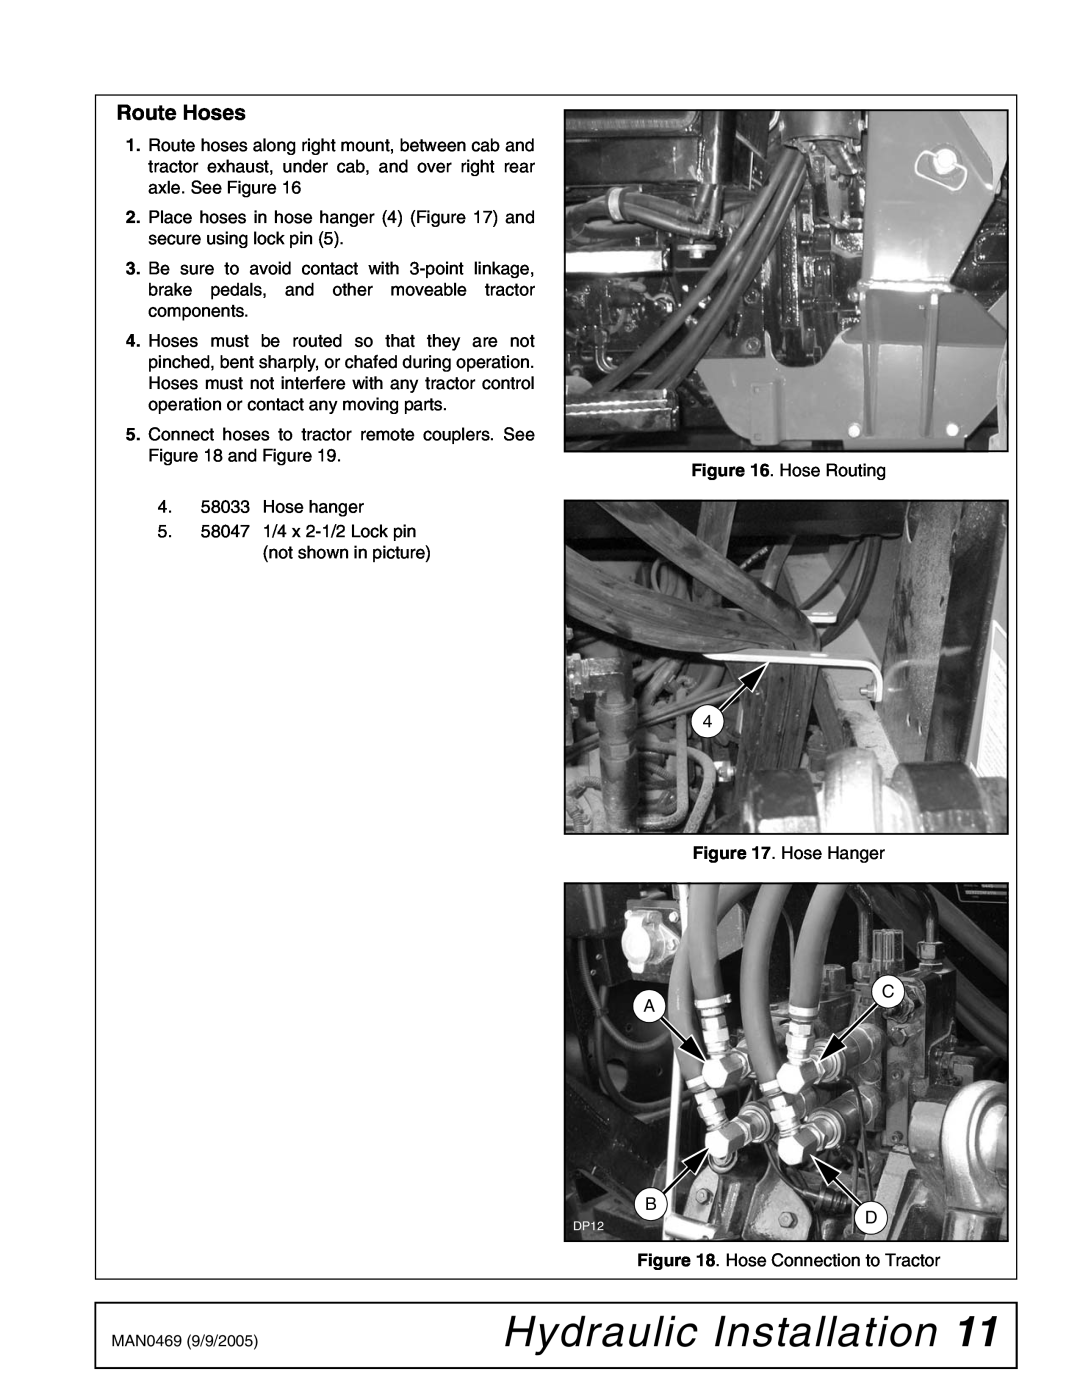 Woods Equipment 211822 installation manual Route Hoses, Hydraulic Installation 